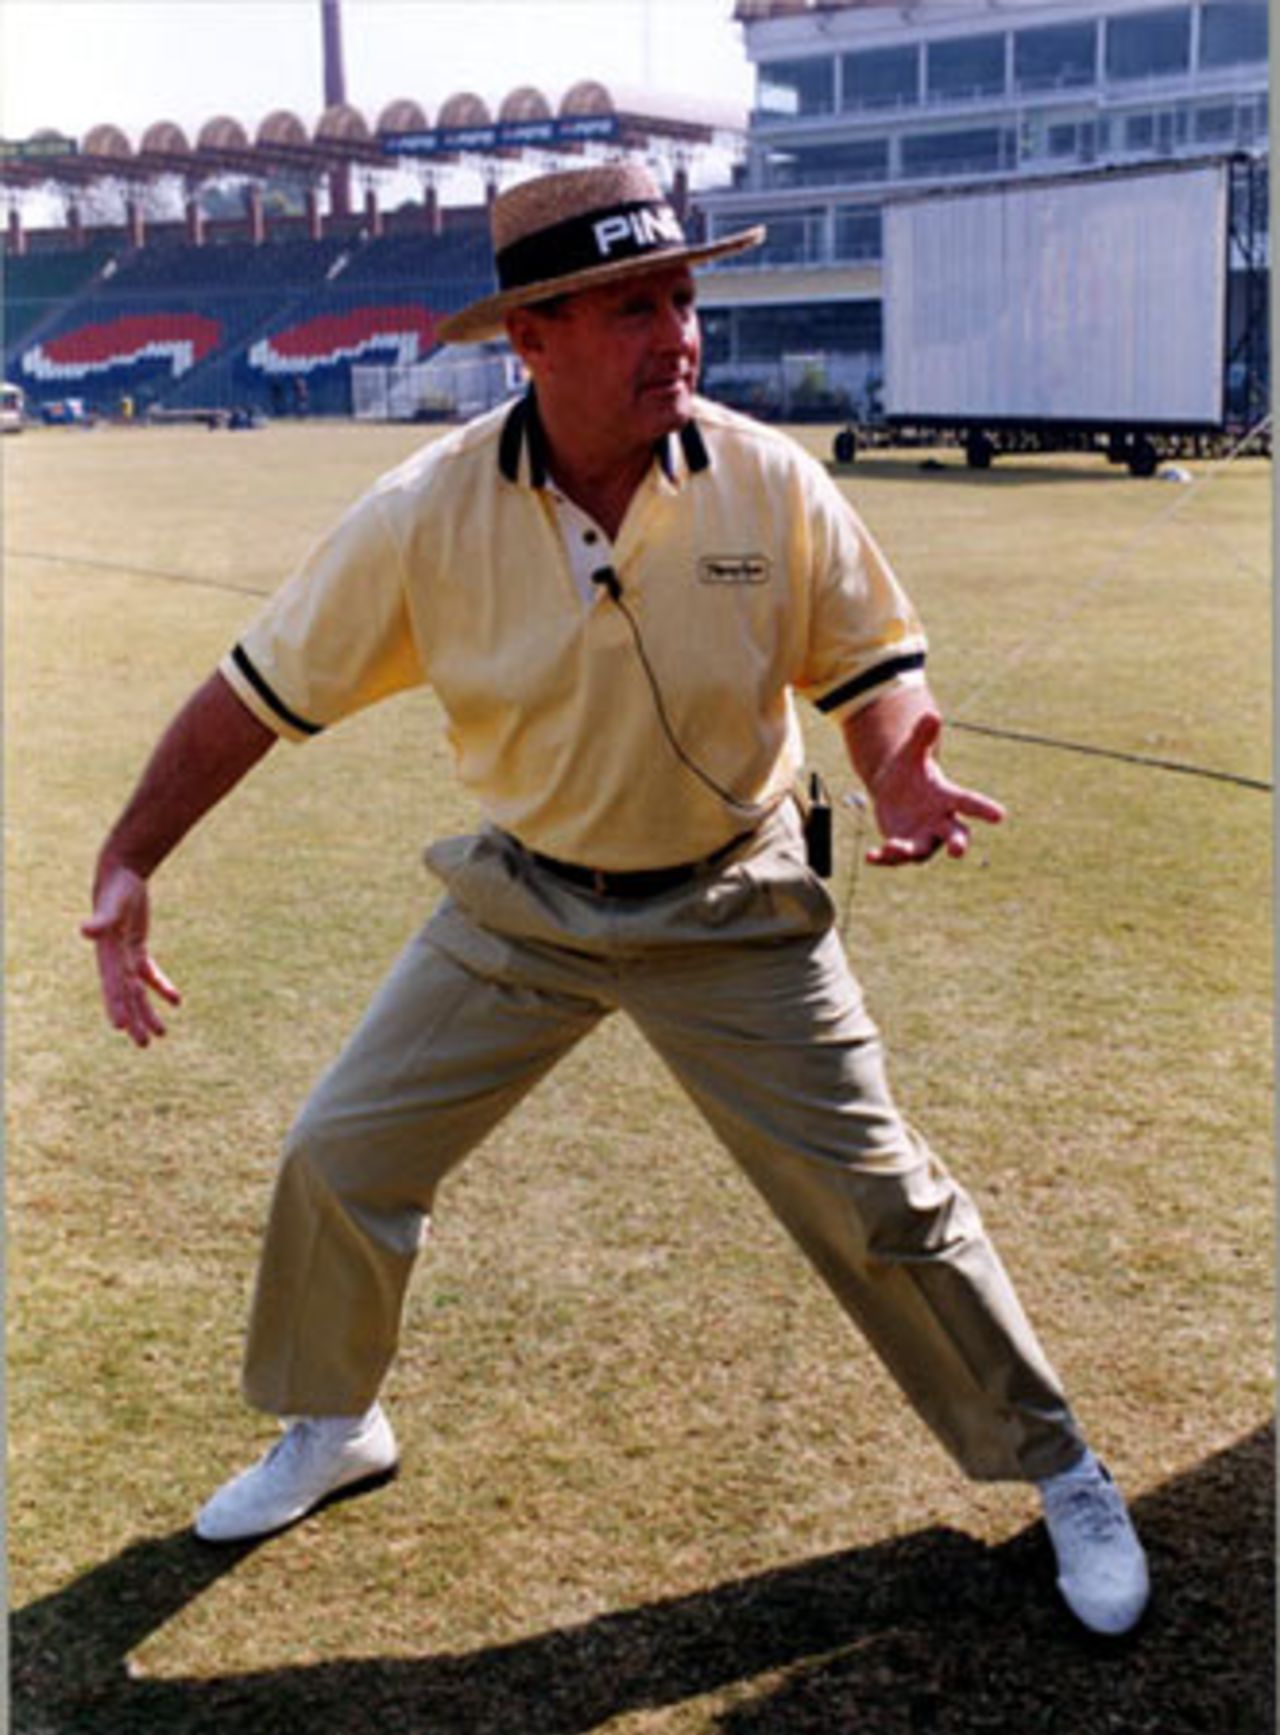 Sprightly Geoff Boycott demonstrates some foot movements, Gaddafi Stadium Lahore, during the Feb 2001 coaching session